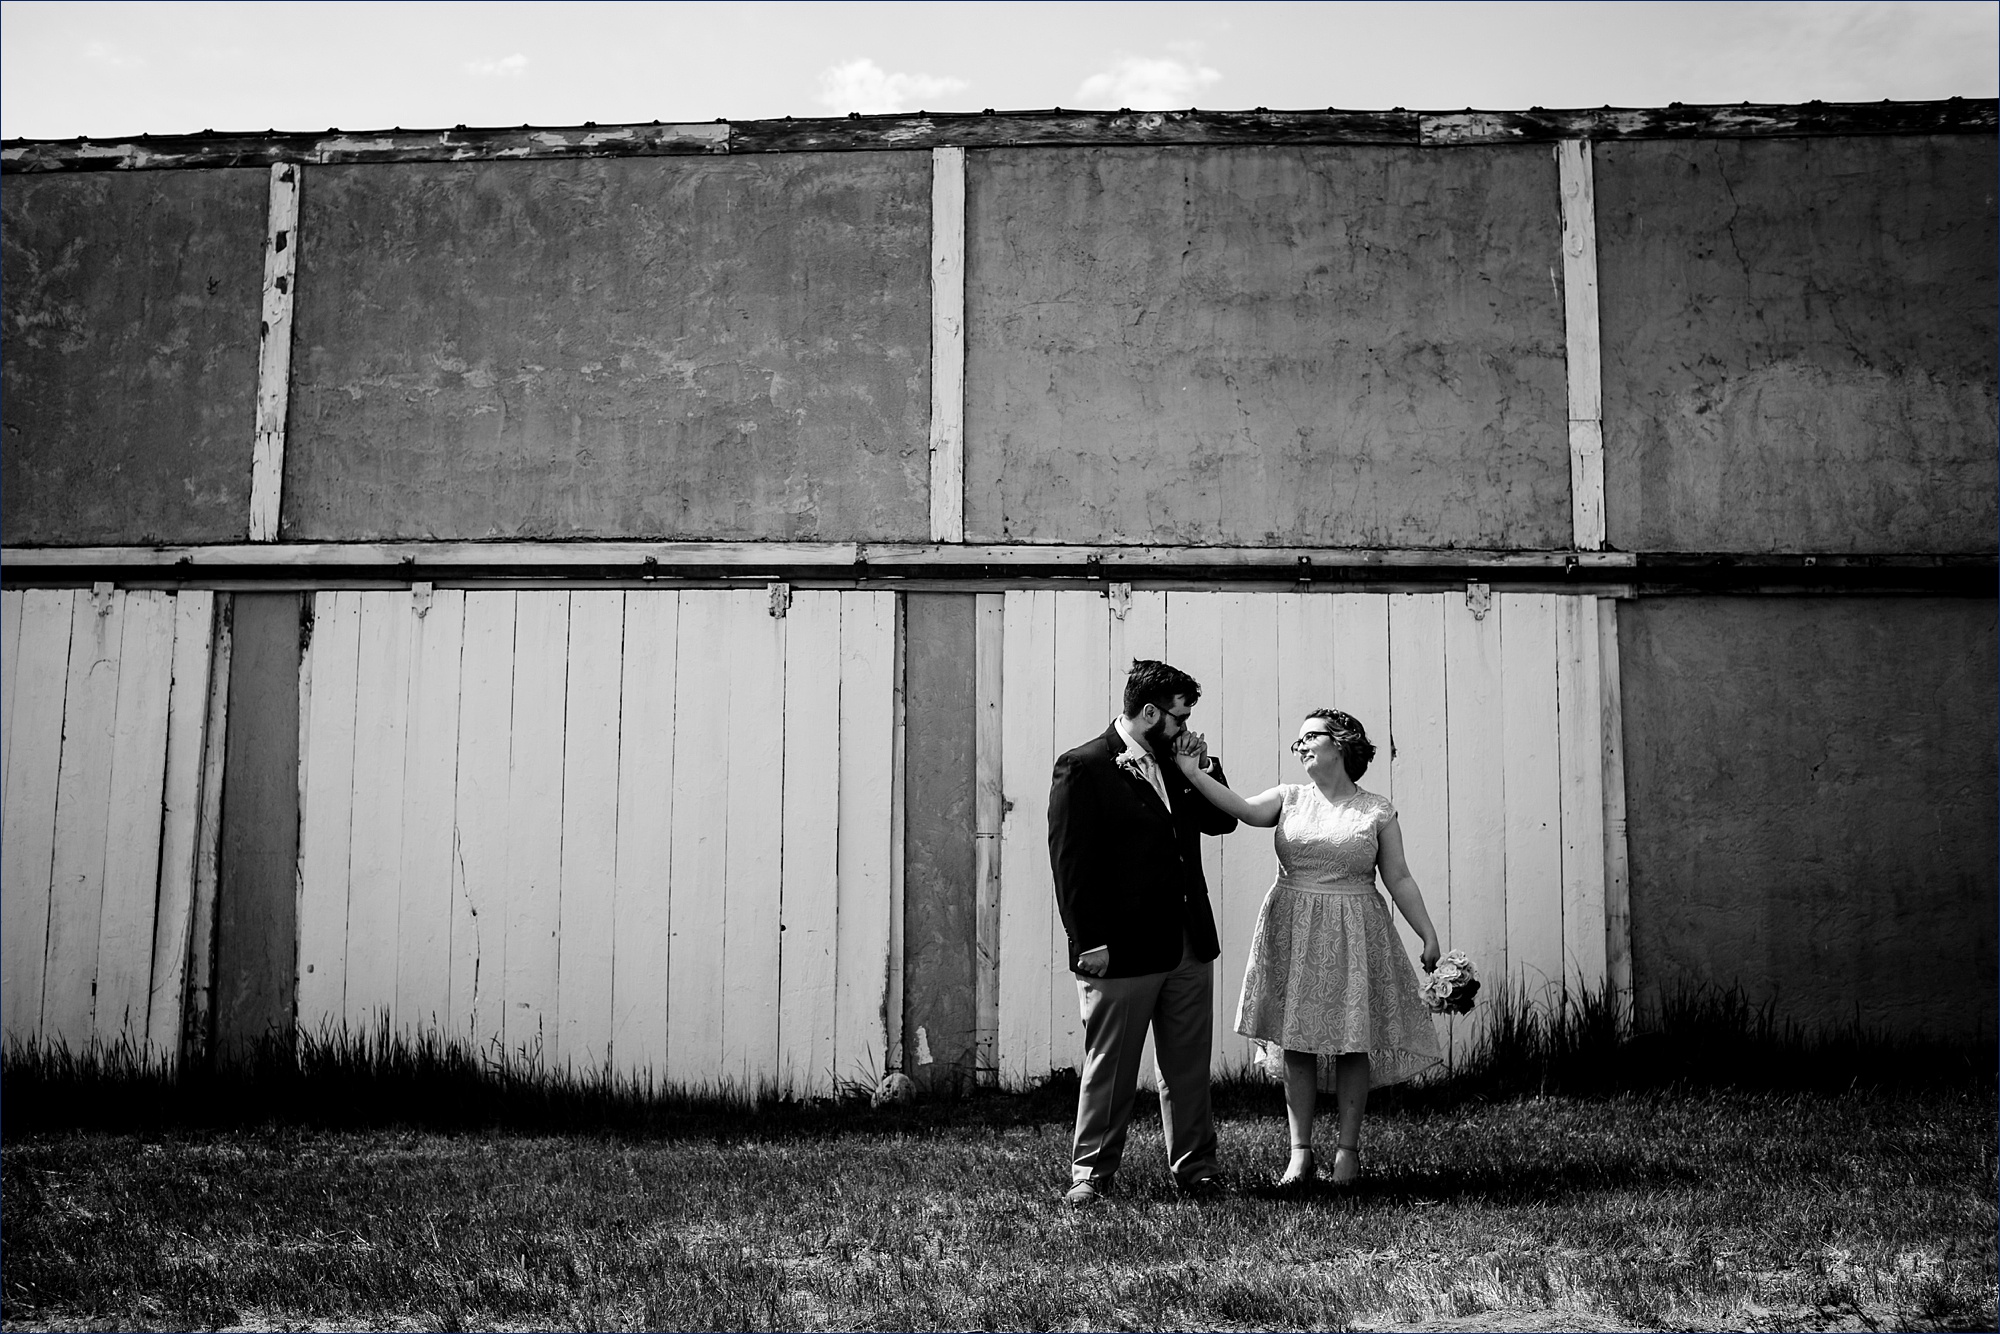 The groom showers the bride with a kiss on the hand in front of a garage at his family's Maine farmhouse